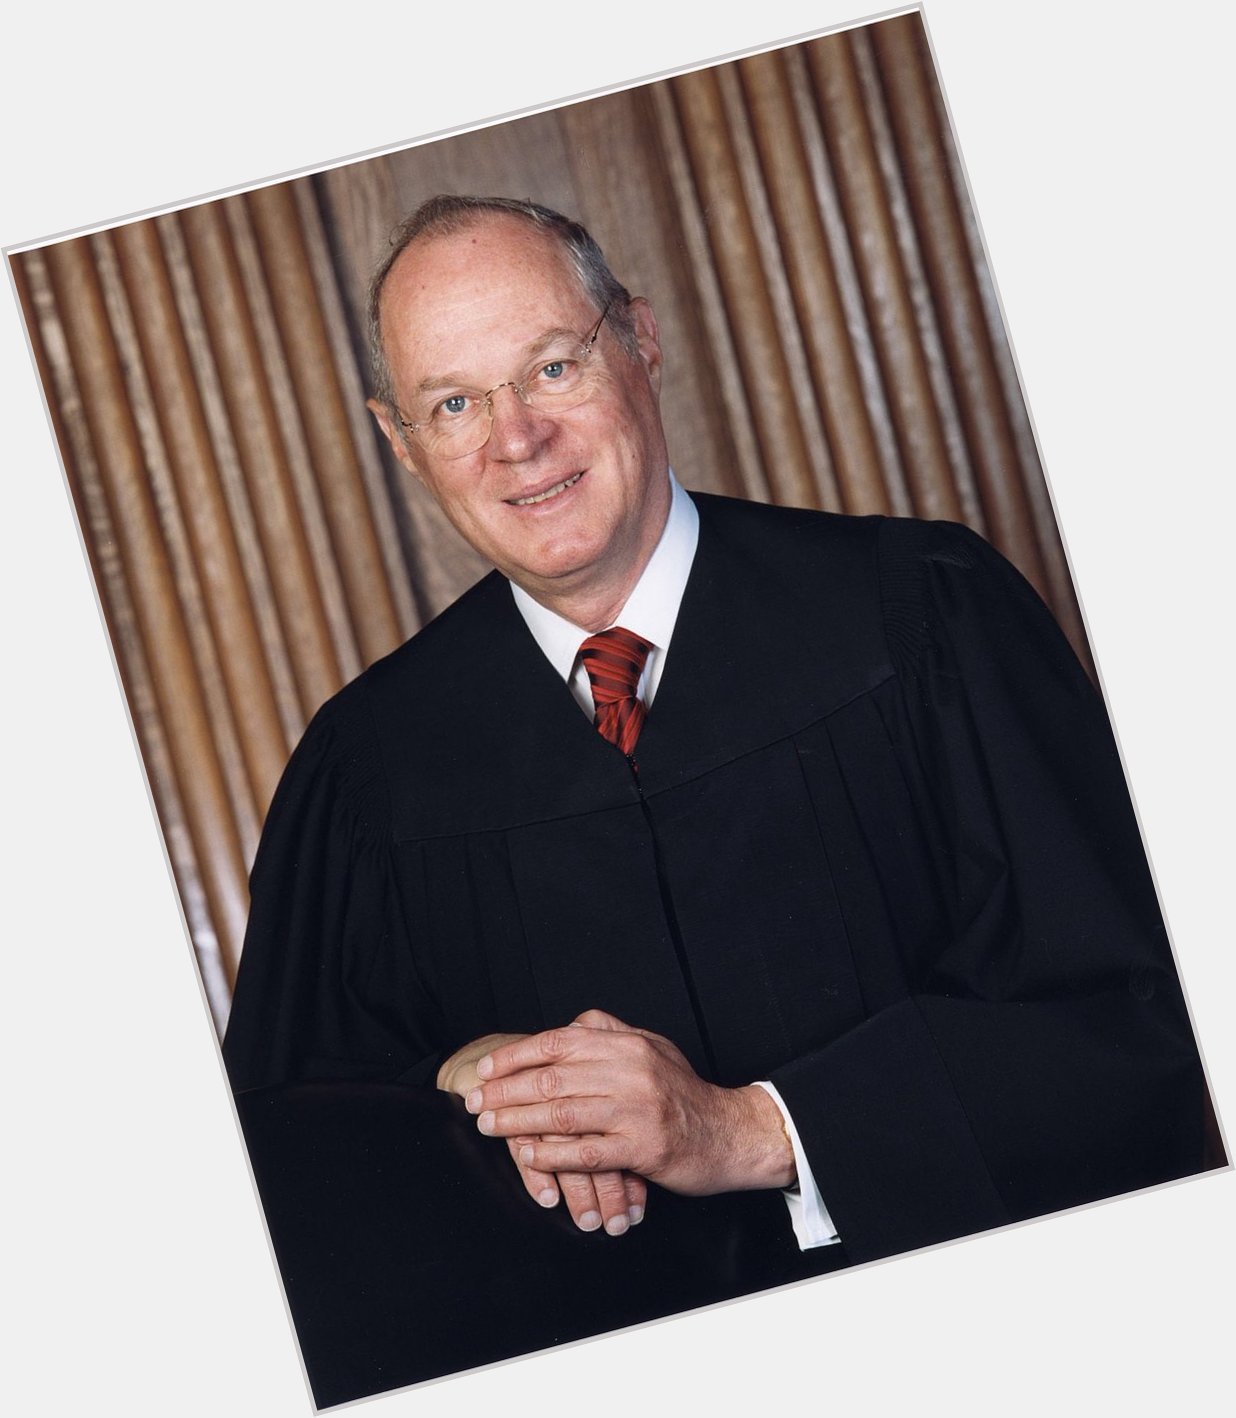 By a vote of 5-4, the Supreme Ct. wishes Justice Anthony Kennedy a Happy Birthday! He was the swing vote. 